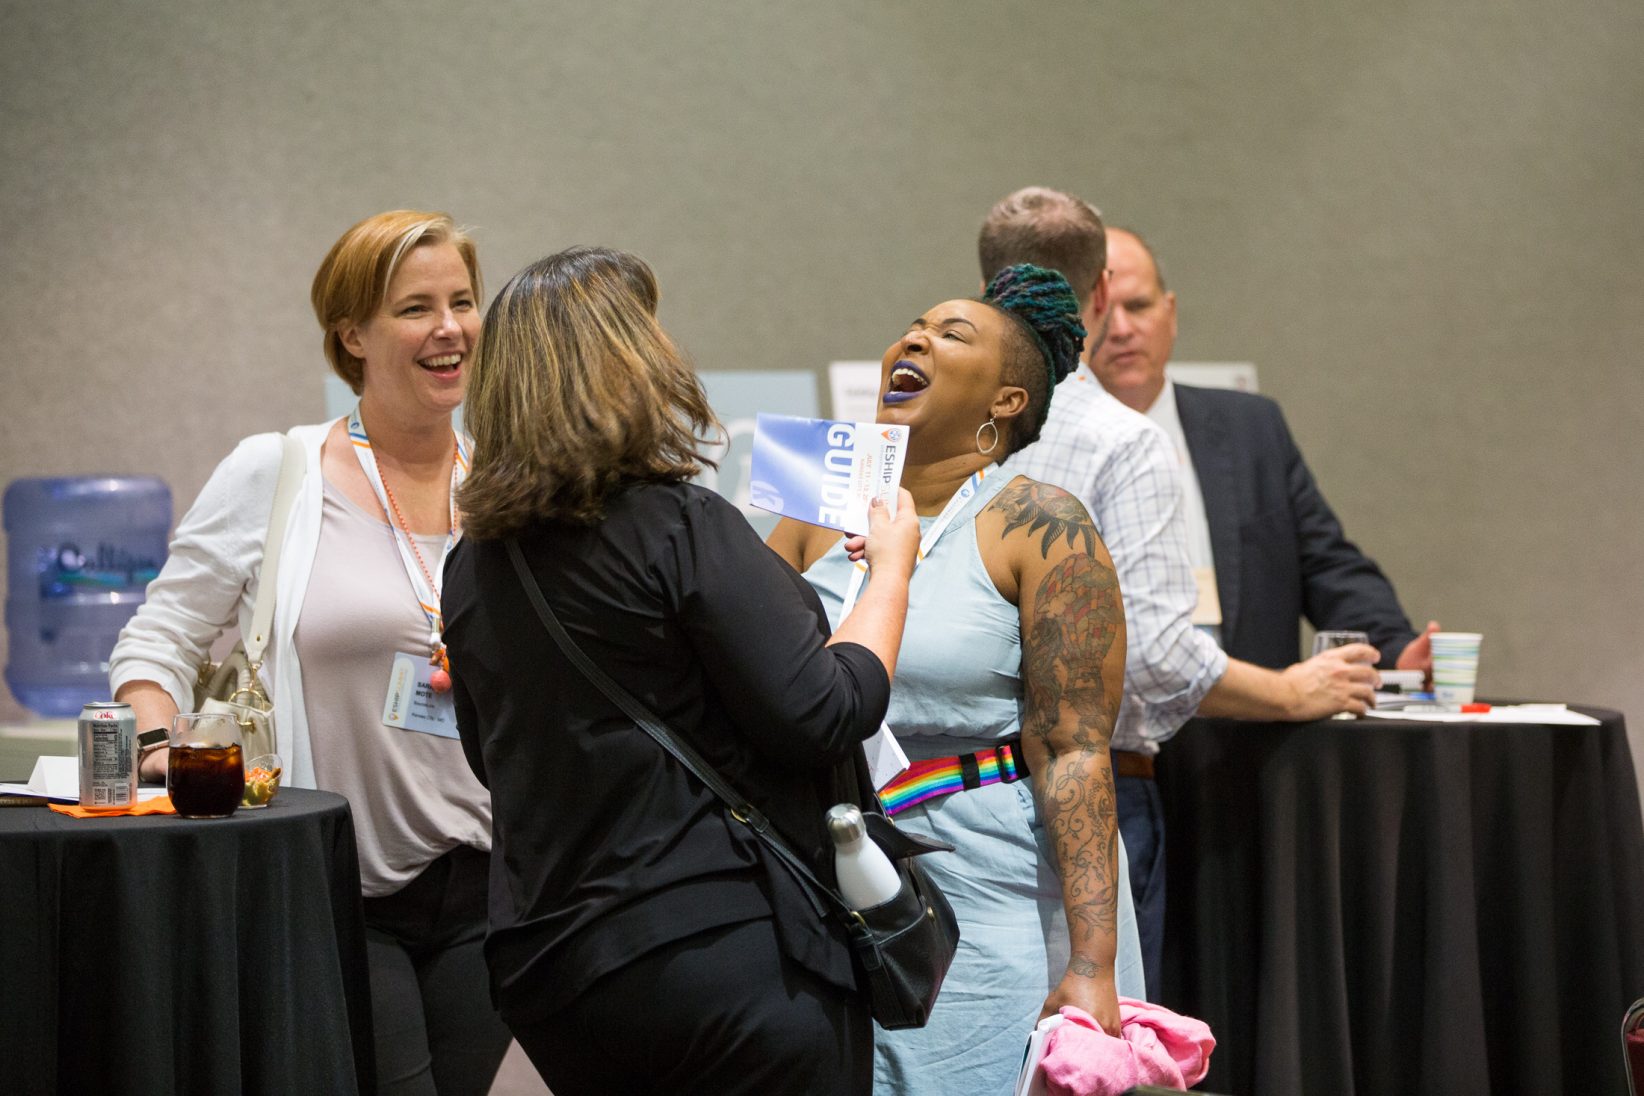 Photos: Kauffman’s ESHIP Summit sees strength in numbers, diversity